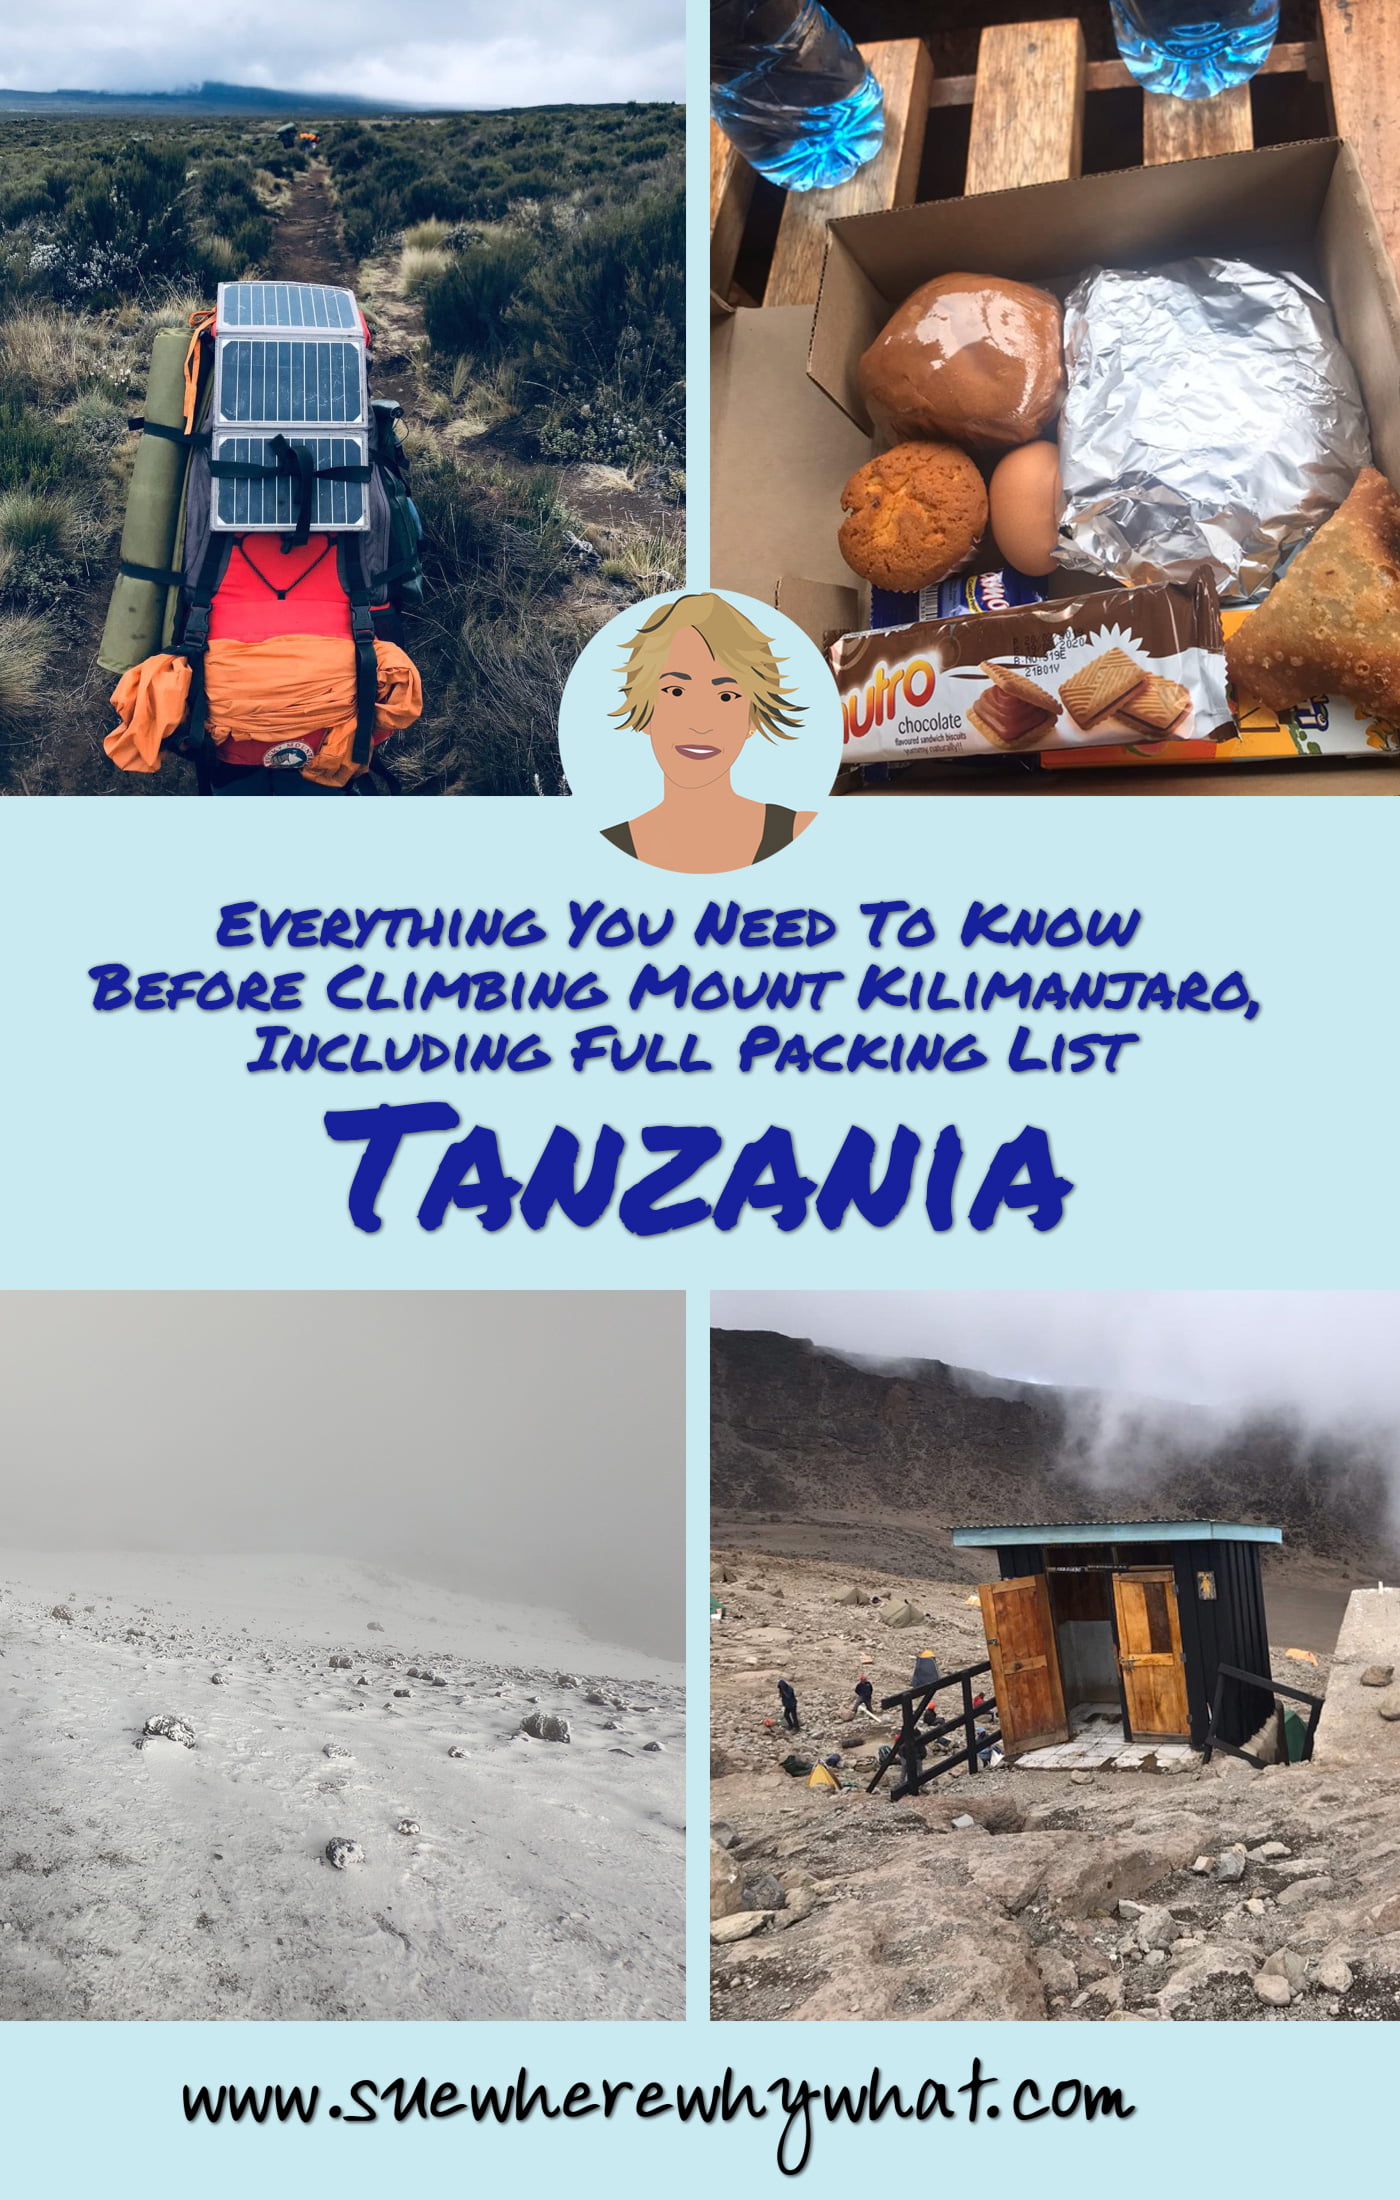 Everything You Need To Know Before Climbing Mount Kilimanjaro, Including Full Packing List